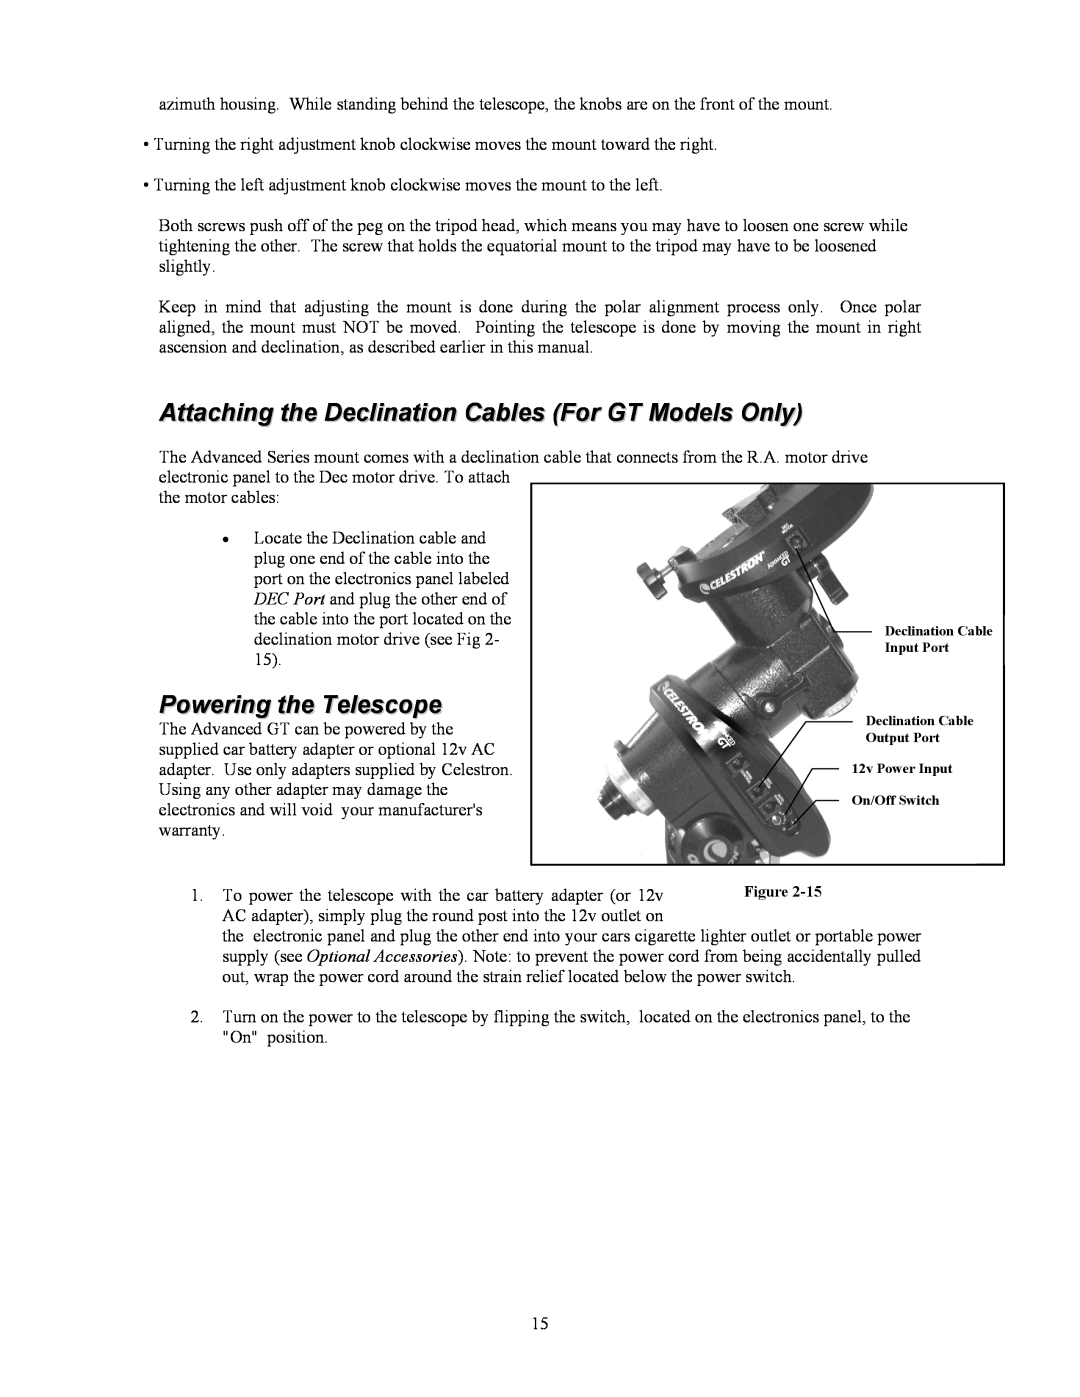 Celestron C8-S, C5-S, C9.25-S instruction manual Attaching the Declination Cables For GT Models Only, Powering the Telescope 